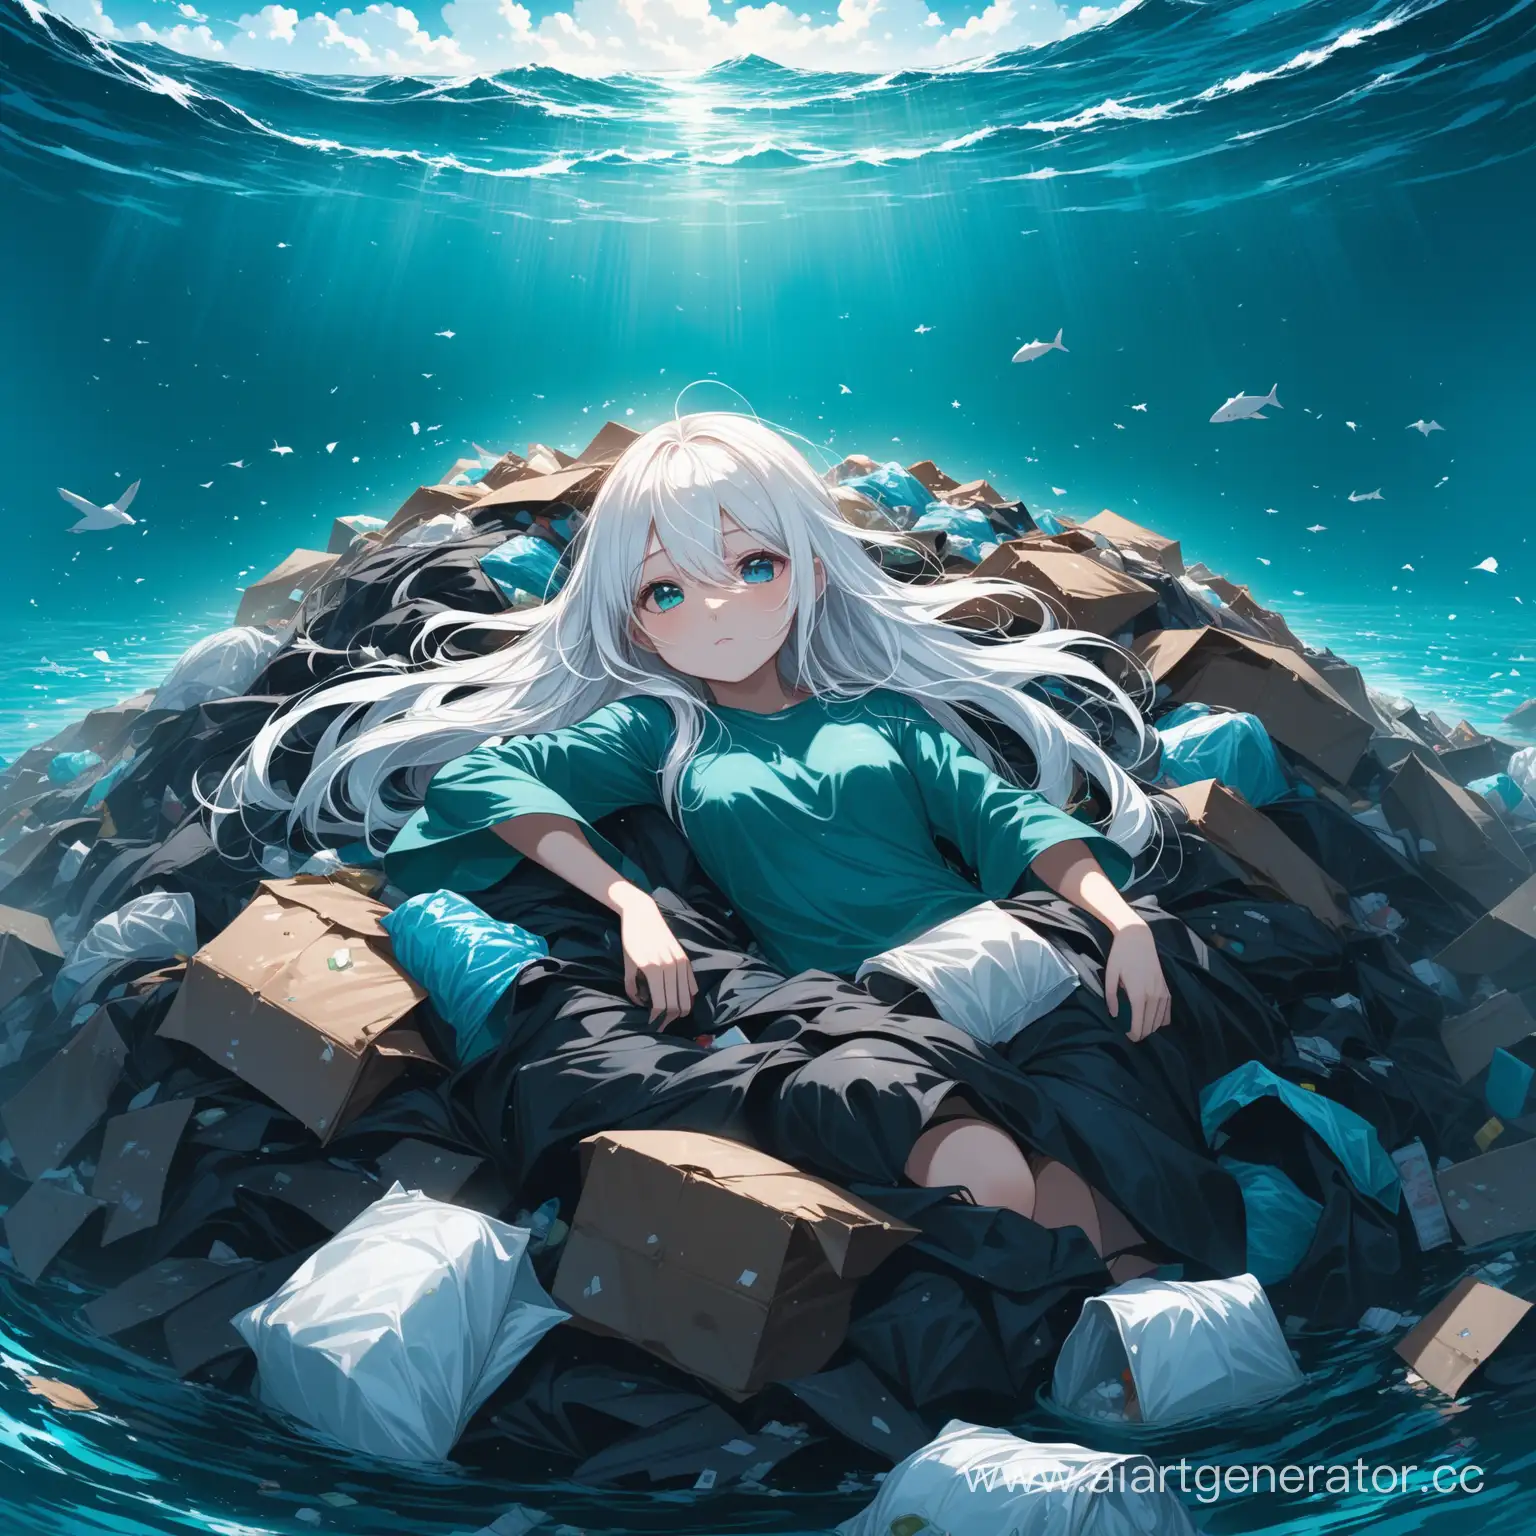 Eerie-Scene-of-a-WhiteHaired-Girl-Amidst-Turquoise-Waters-and-Garbage